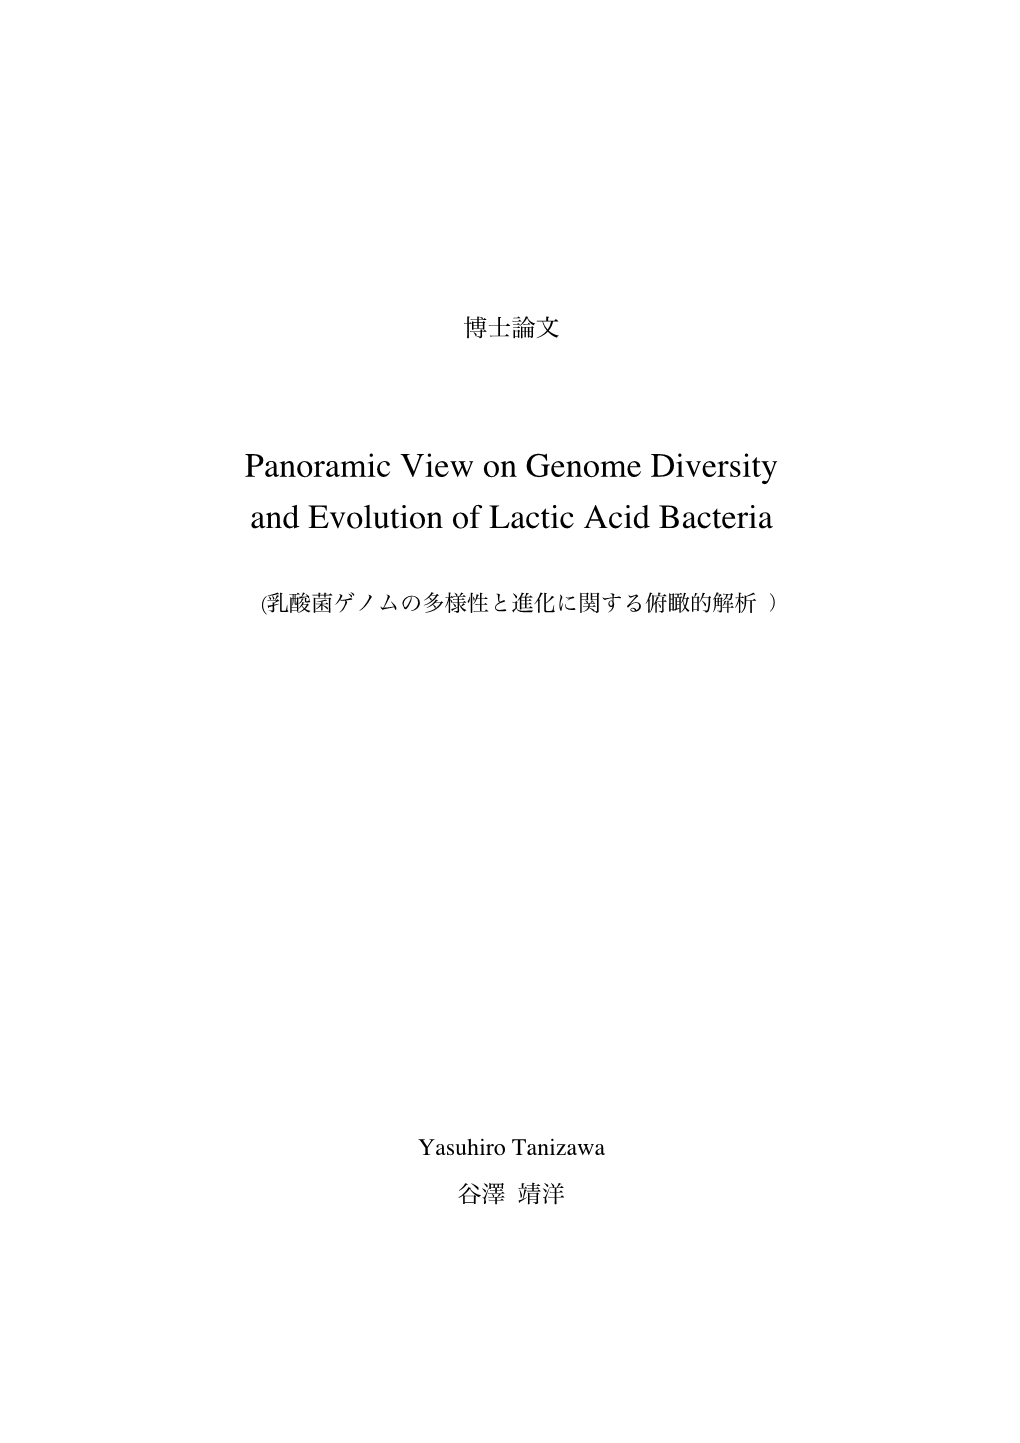 Panoramic View on Genome Diversity and Evolution of Lactic Acid Bacteria